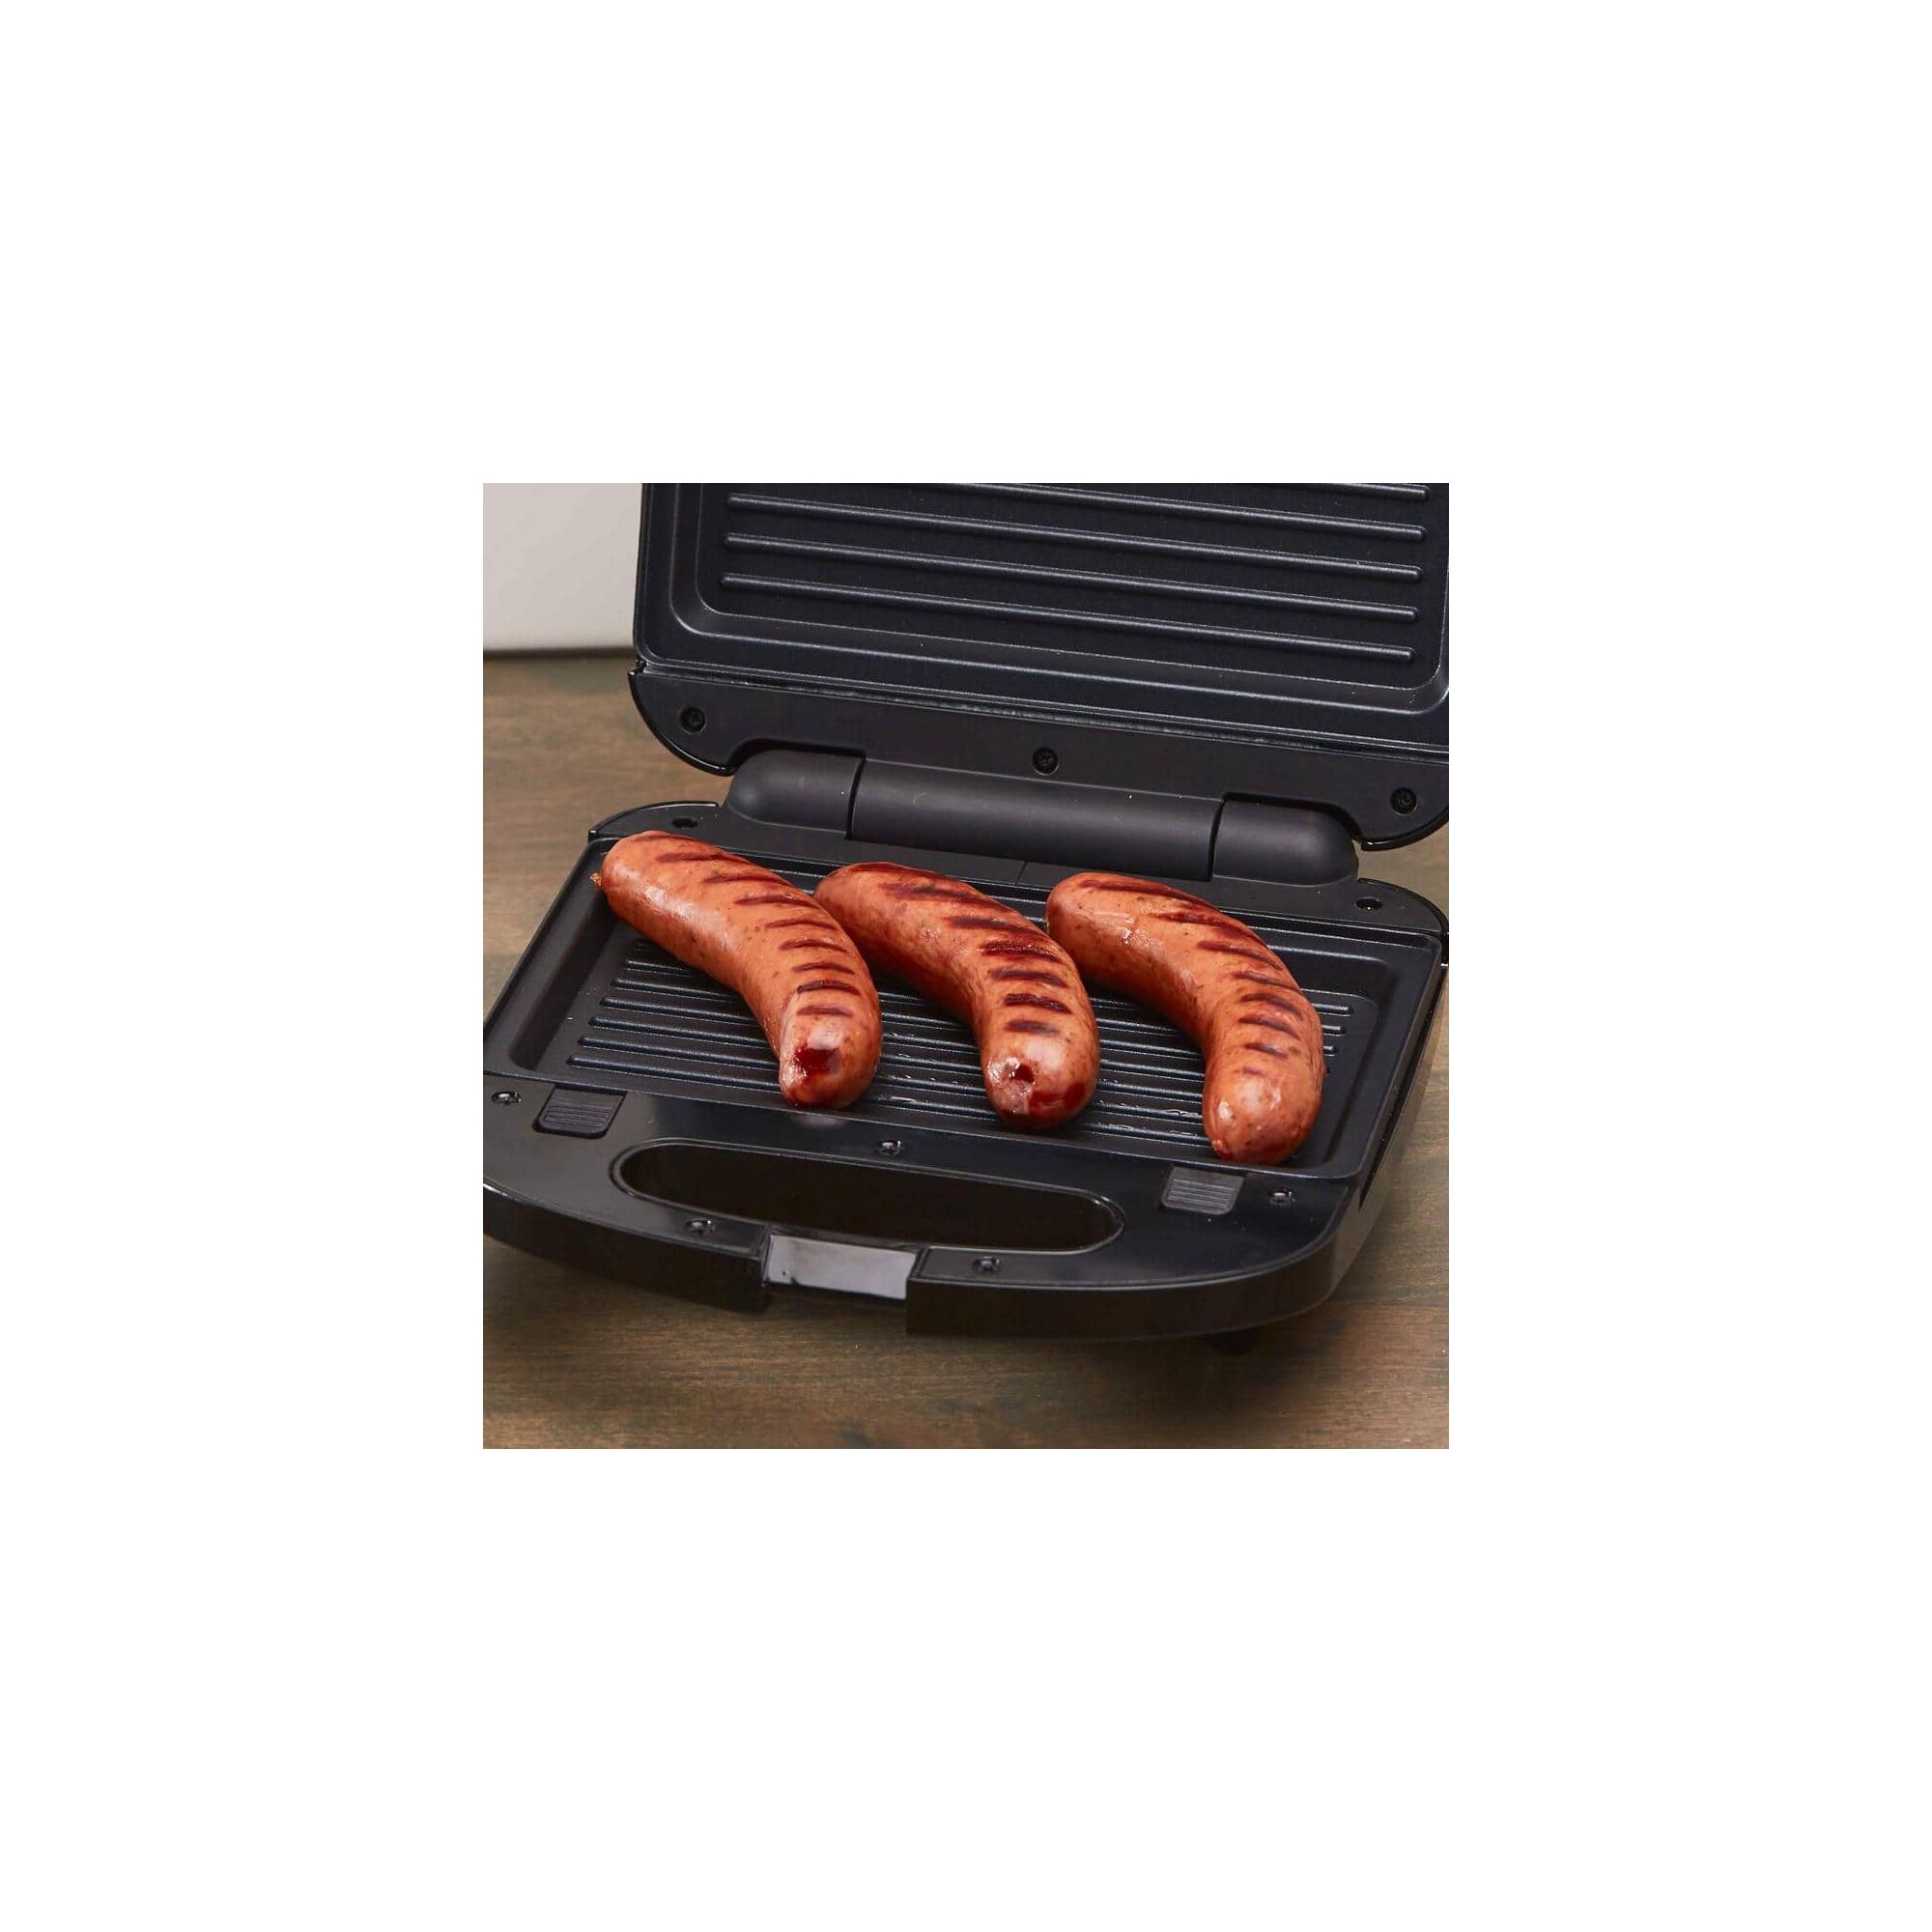 Waffle Maker Grill or Sandwich Maker with Stainless Steel Accents being used for grilling sausages.